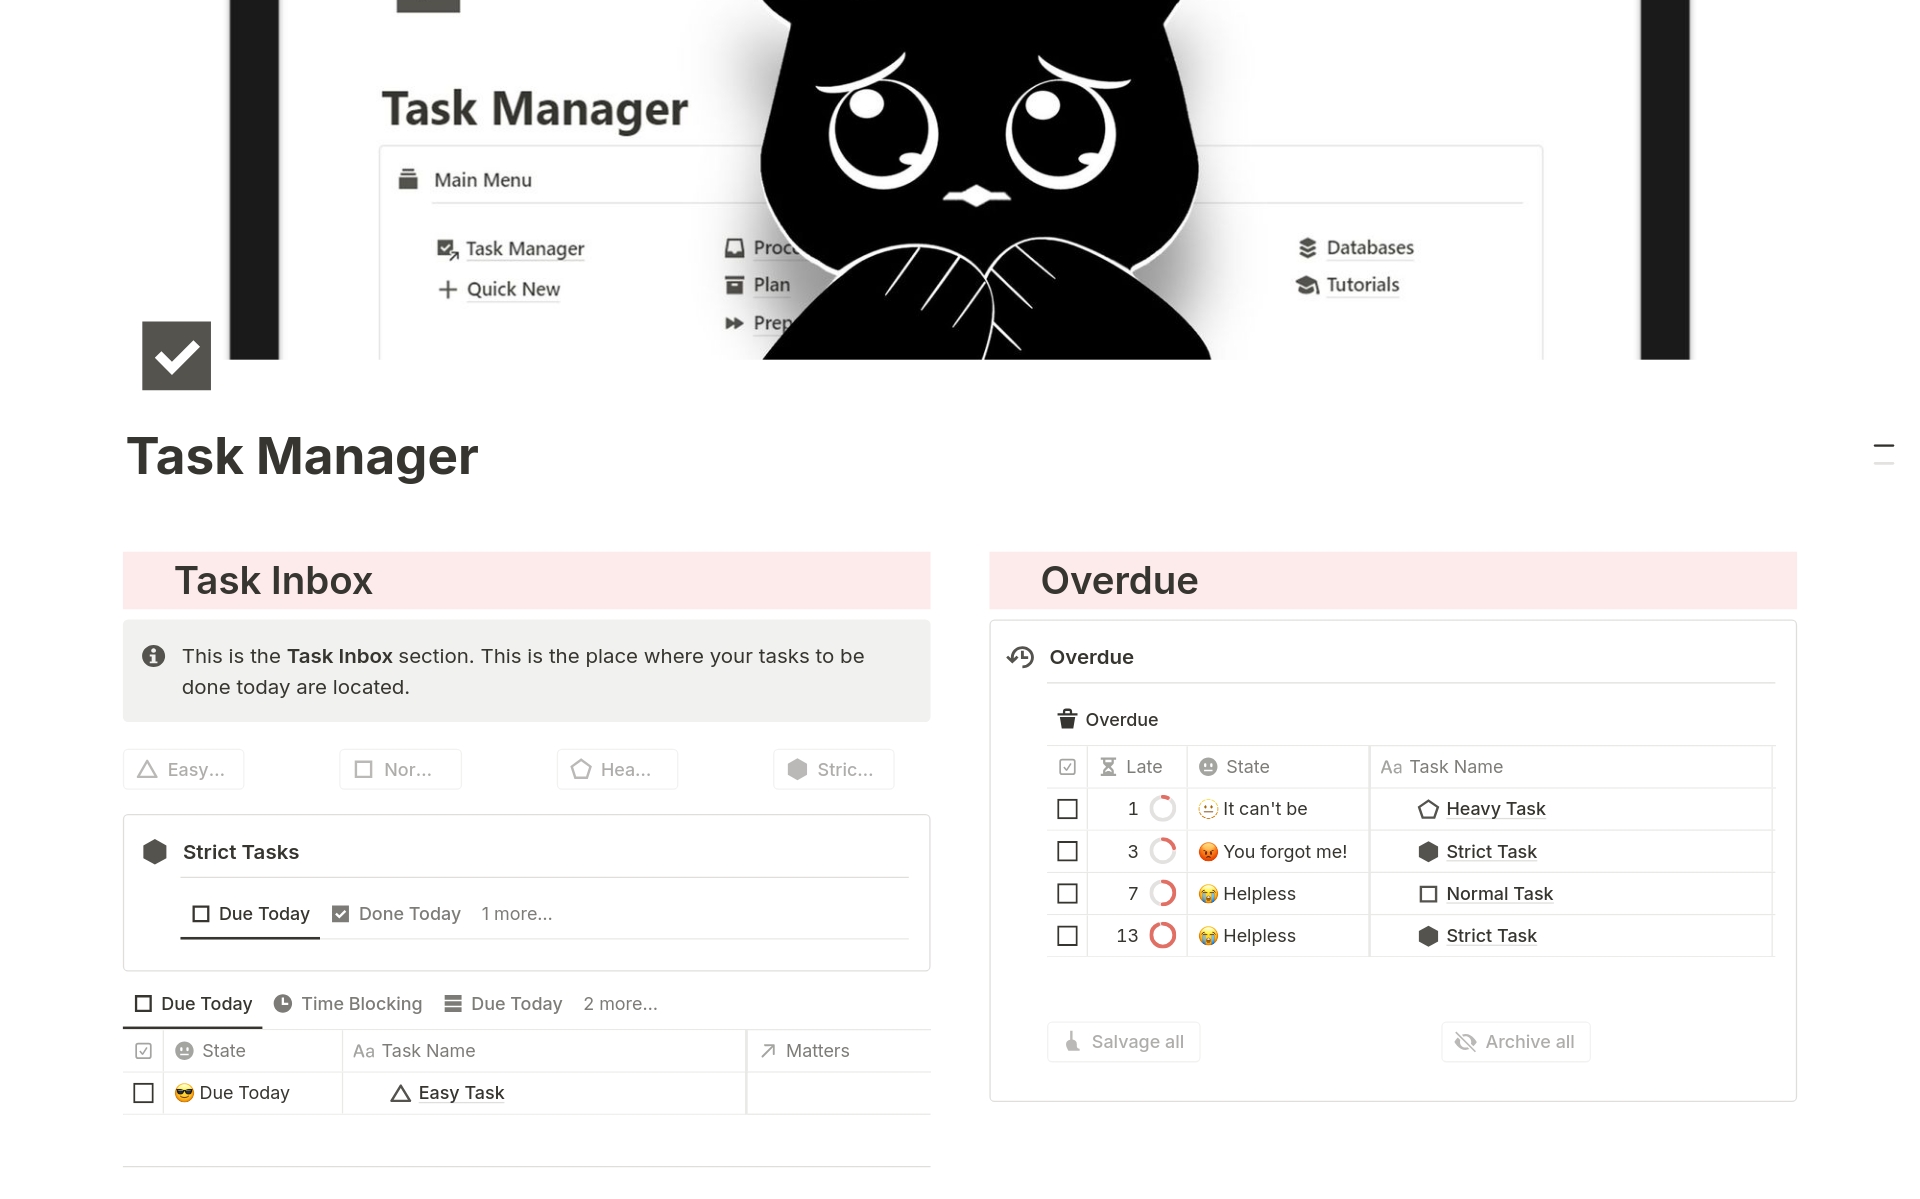 An anti-procrastination Task Manager: Overdue tasks go through 5 stages of grief the longer they are delayed. 🫥 Denial, 😡 Anger, 🥺 Bargaining, 😭 Depression, and 🌚 Acceptance.